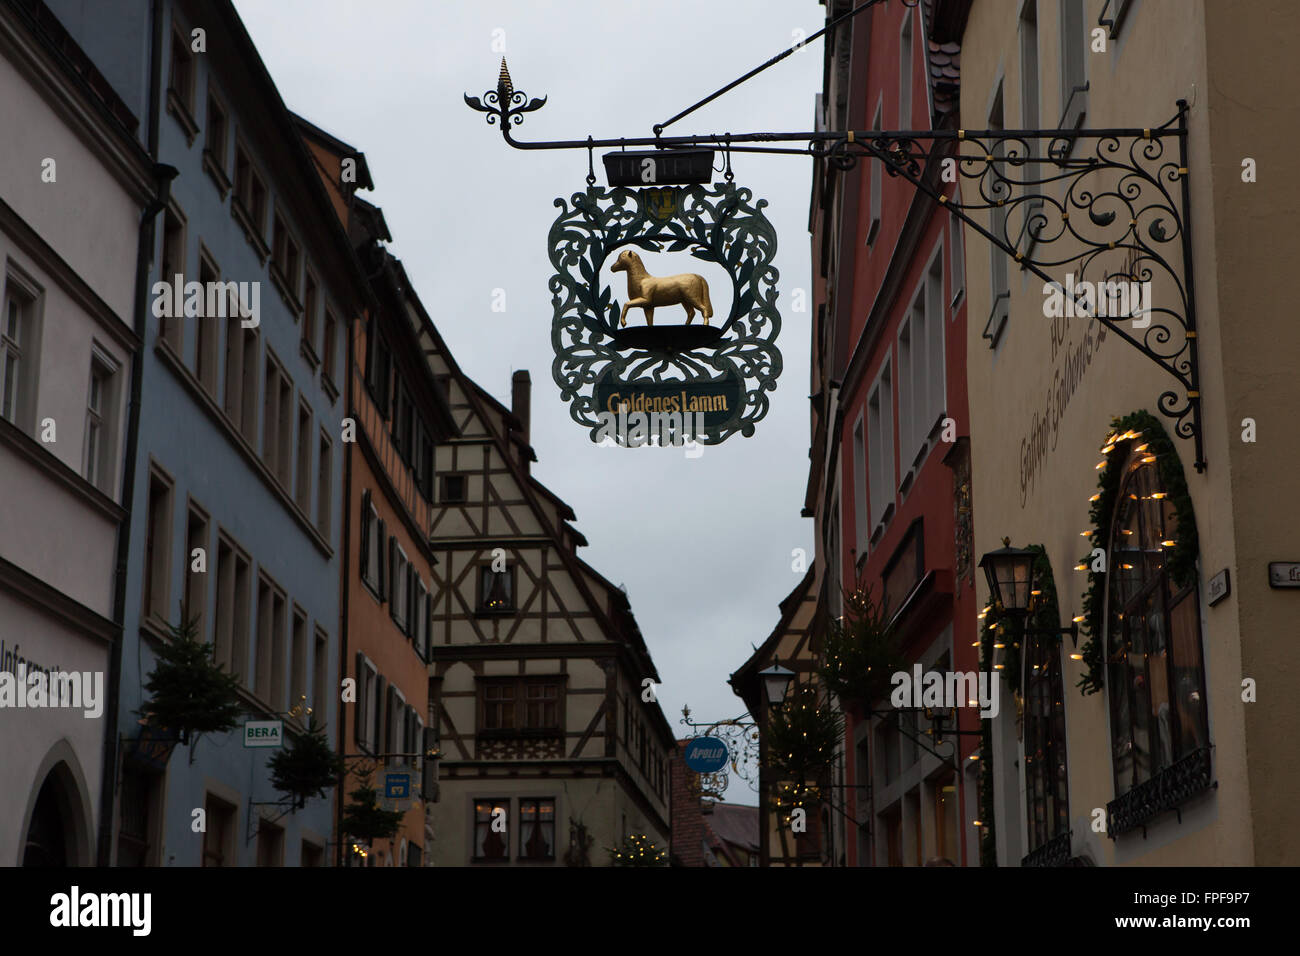 Traditional medieval sign of the Goldenes Lamm Hotel (Golden Lamb Hotel) in Rothenburg ob der Tauber, Middle Franconia, Bavaria, Germany. Stock Photo